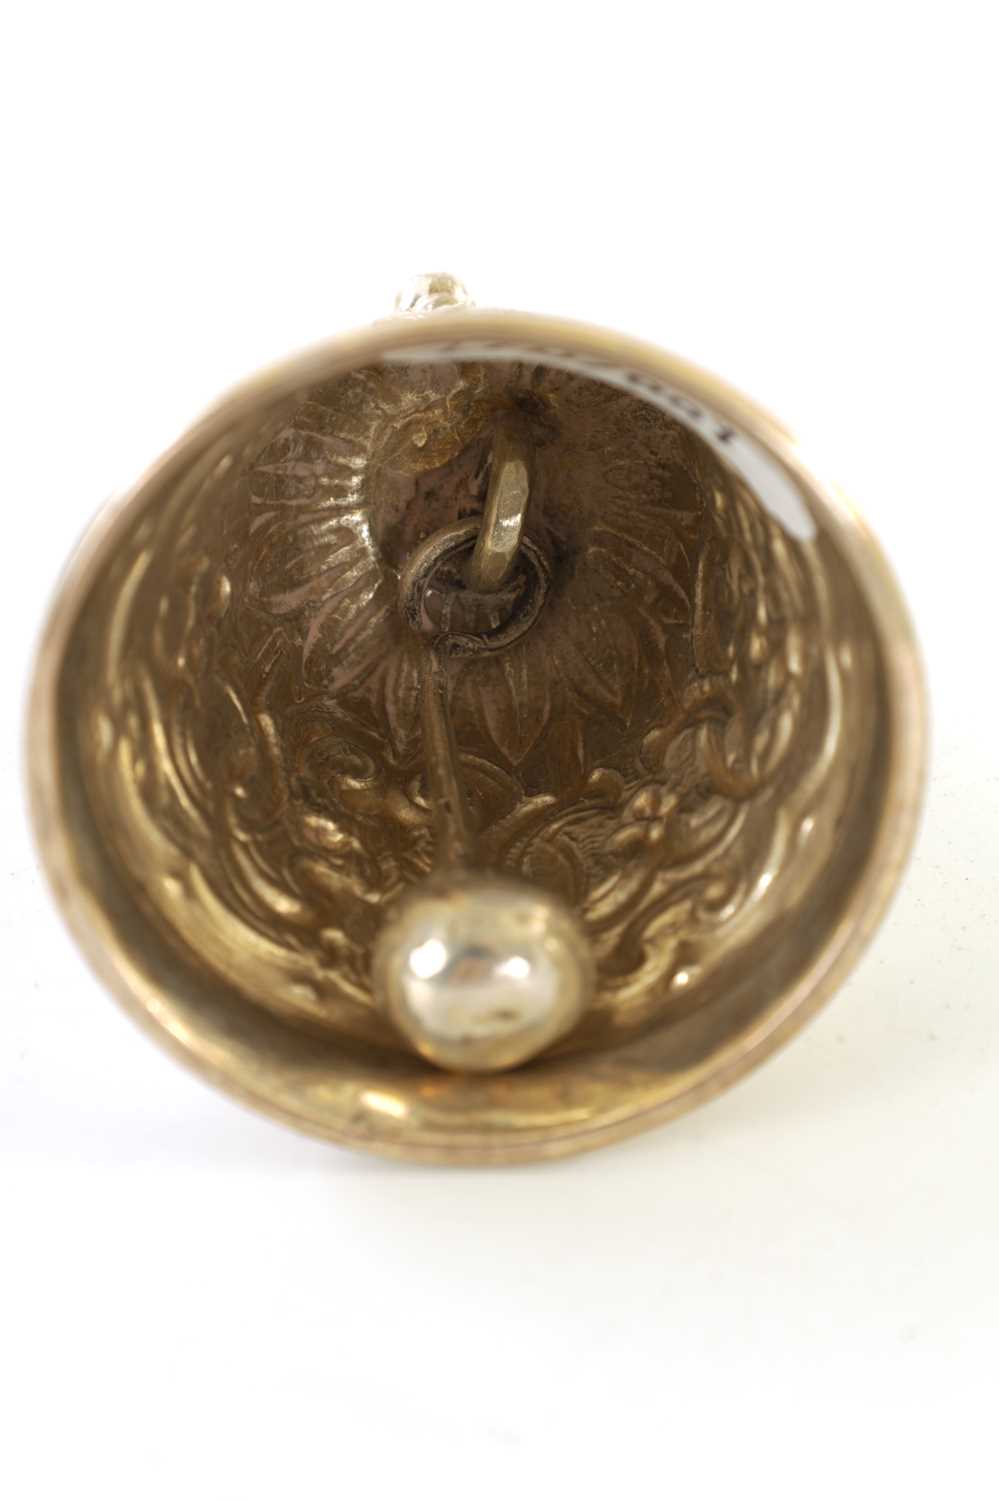 A LATE 19TH CENTURY DUTCH EMBOSSED MINIATURE BELL - Image 4 of 6